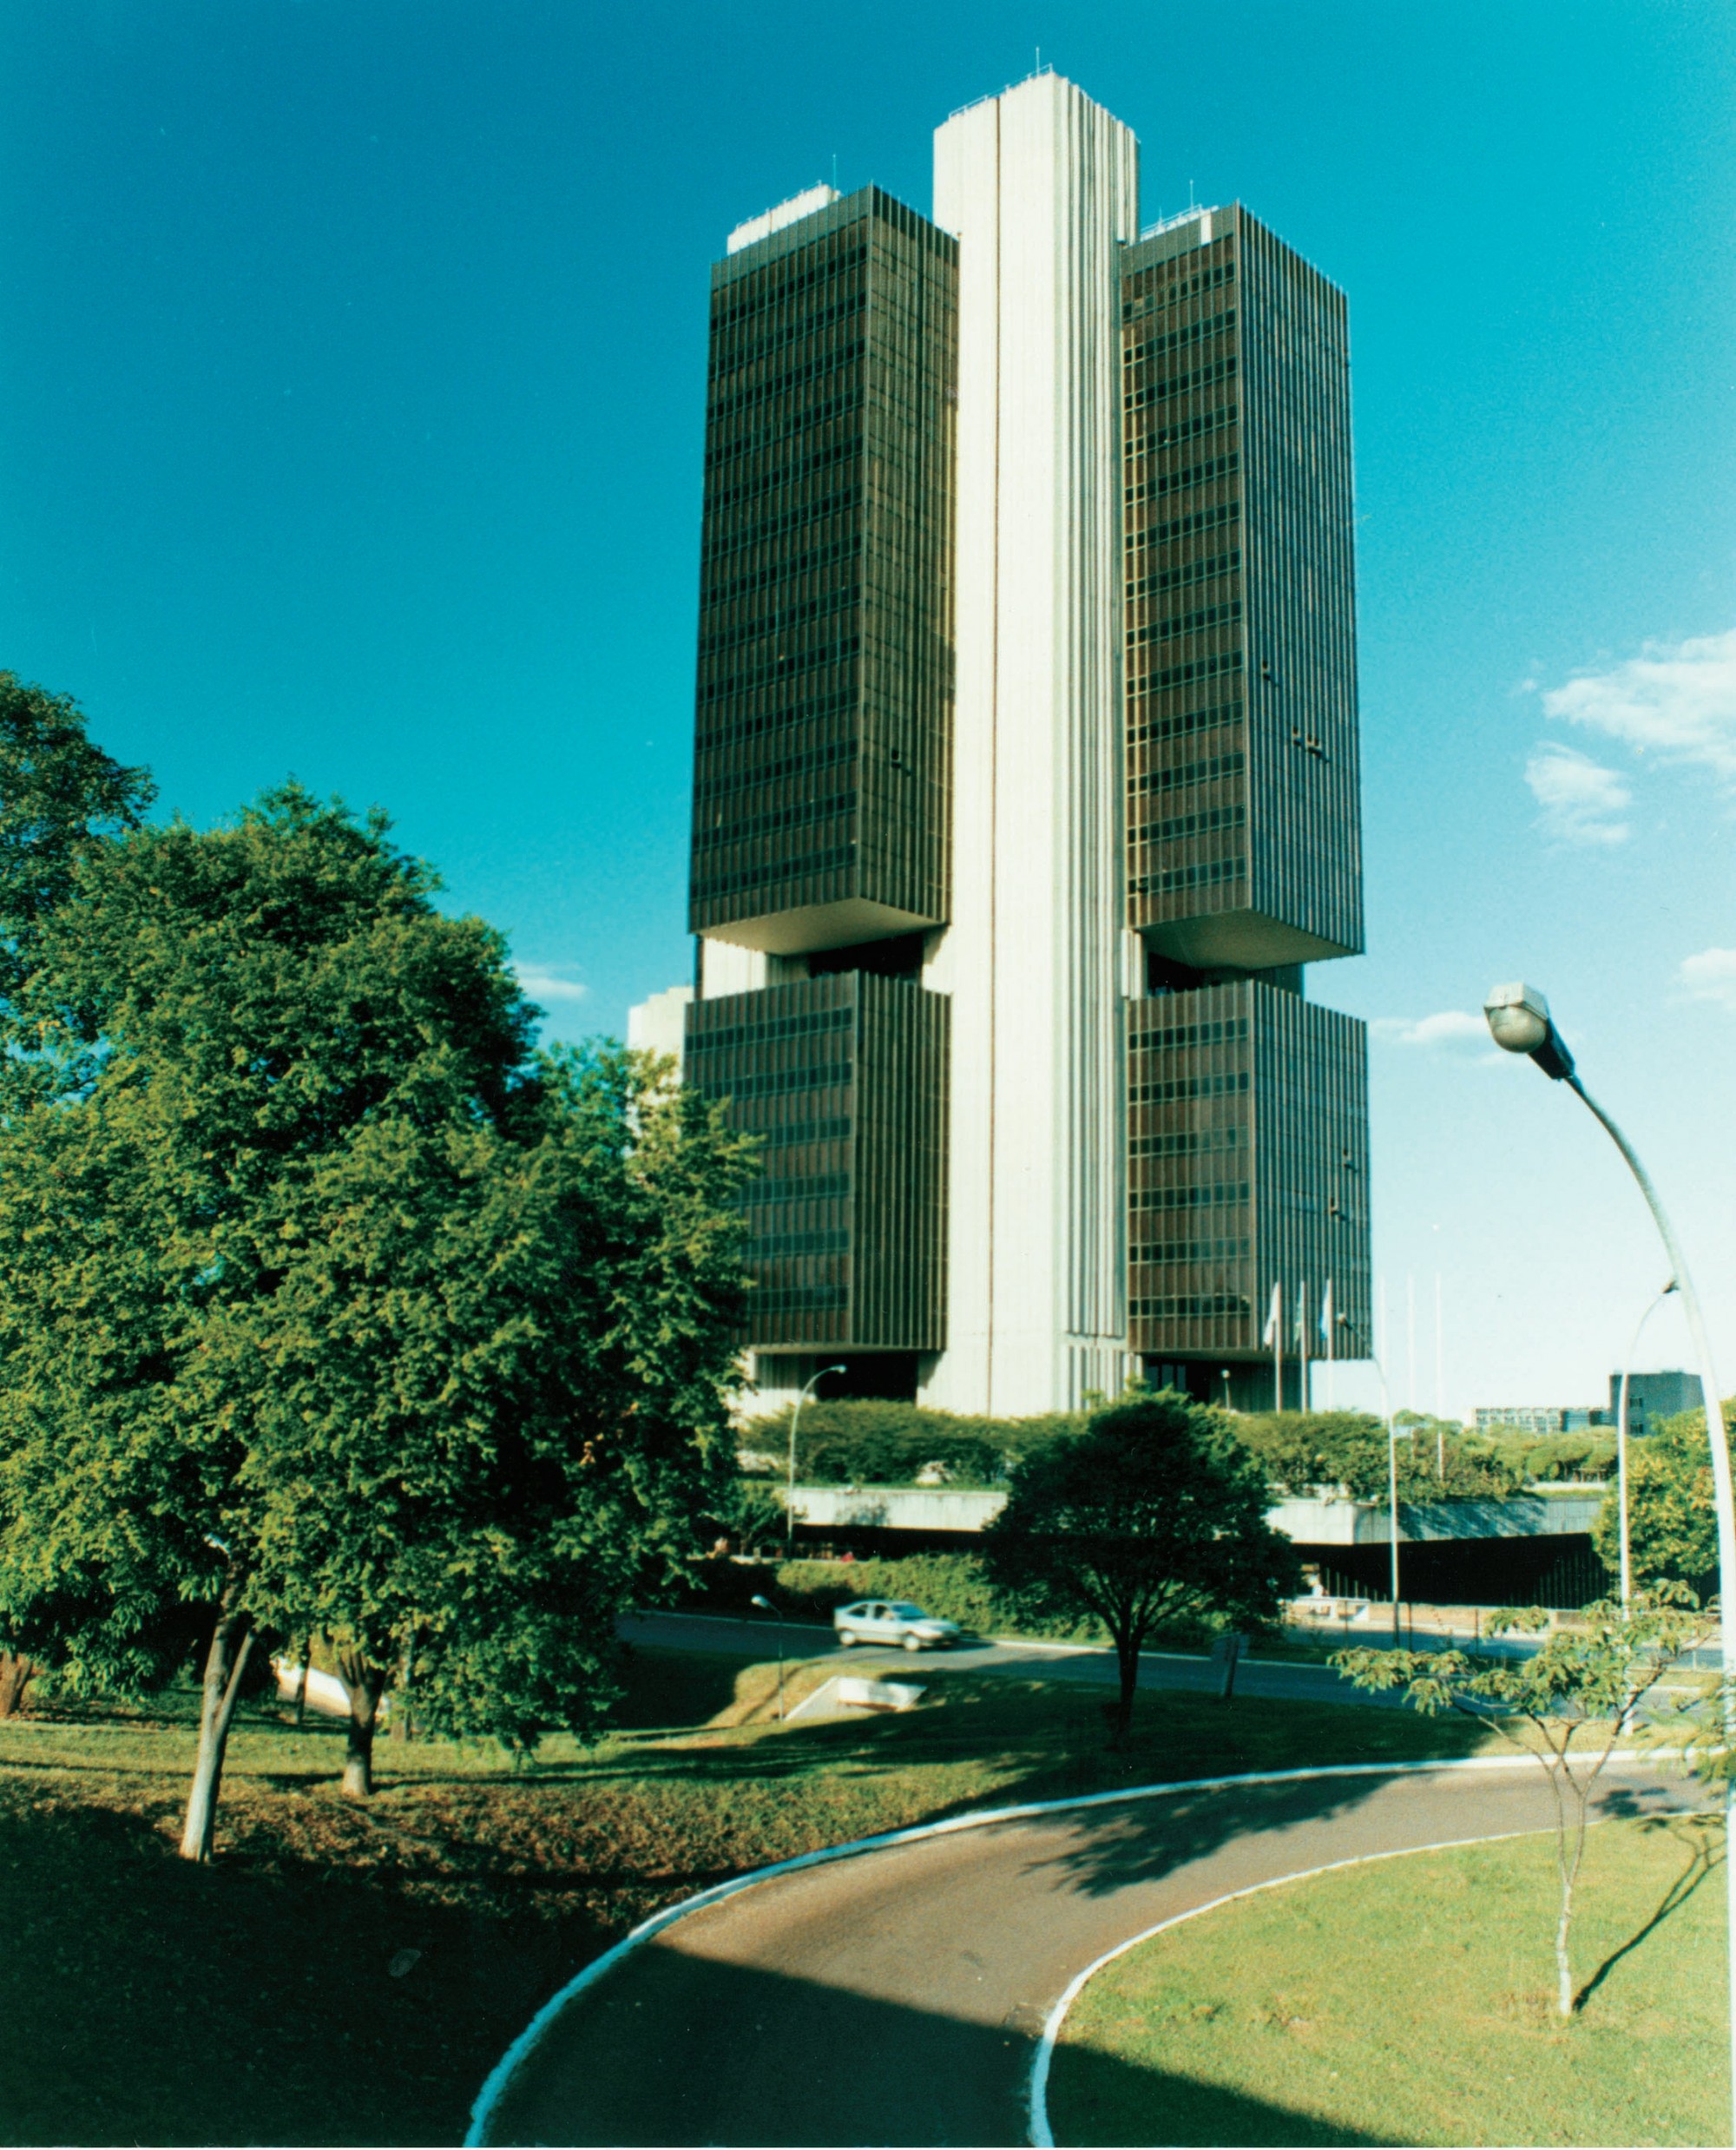 Brazil's Central Bank released results of the country's 2015 public accounts which showed a record deficit,